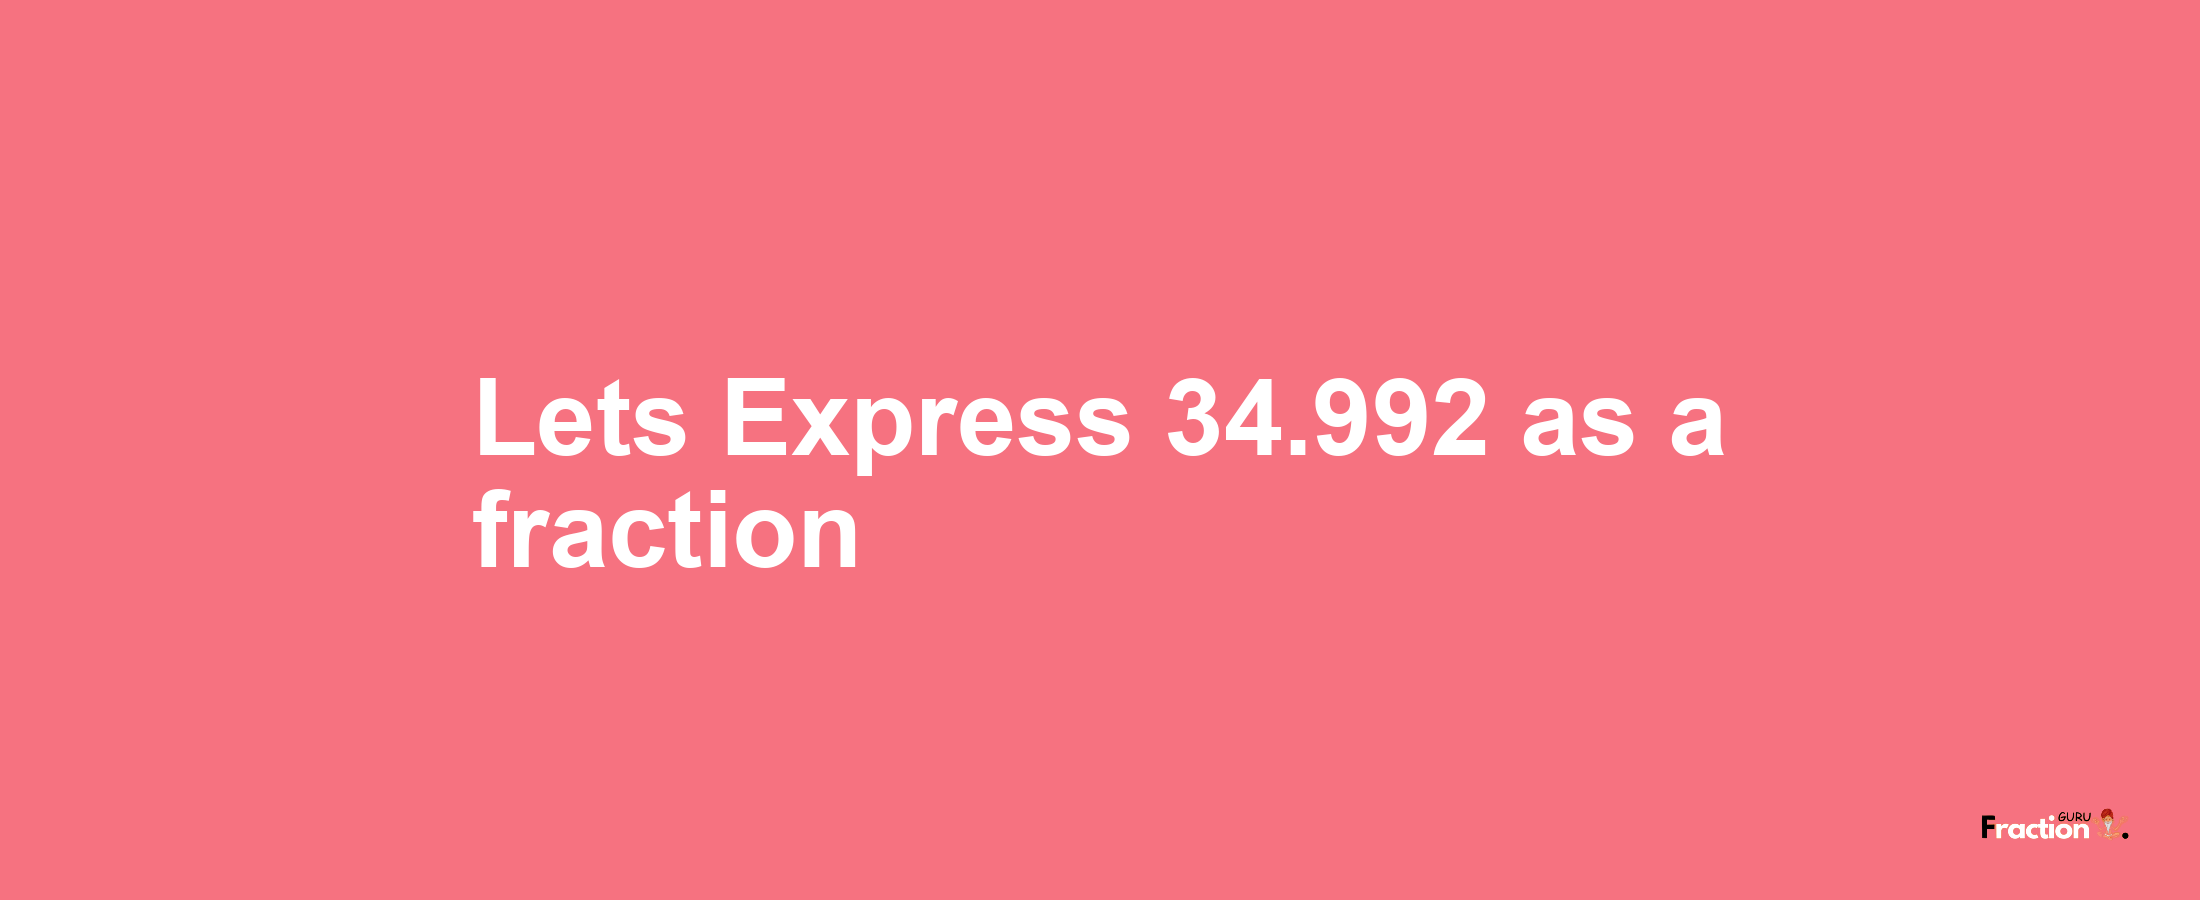 Lets Express 34.992 as afraction